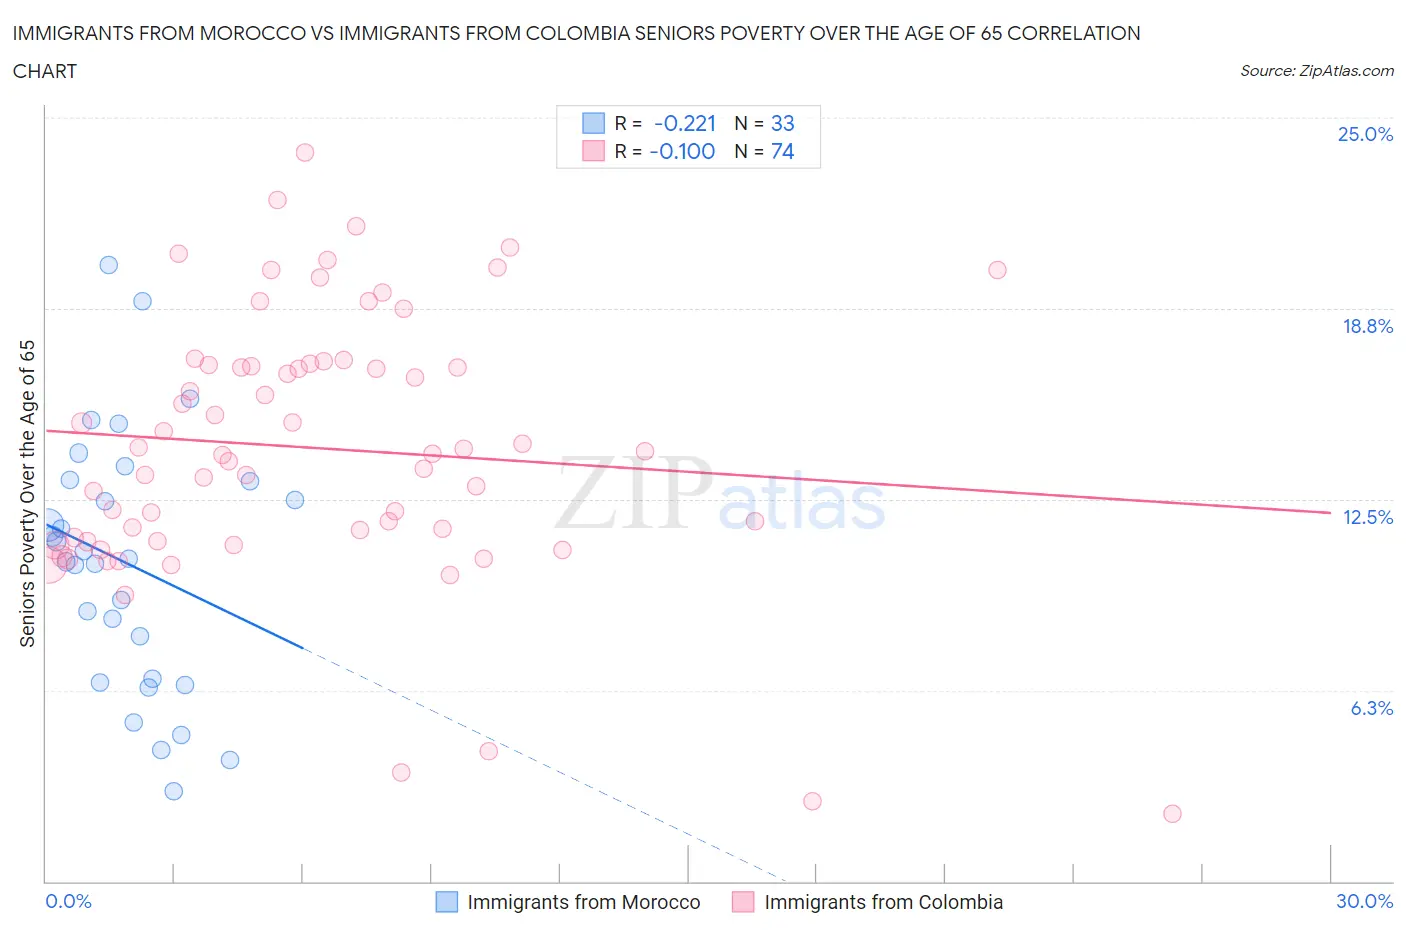 Immigrants from Morocco vs Immigrants from Colombia Seniors Poverty Over the Age of 65